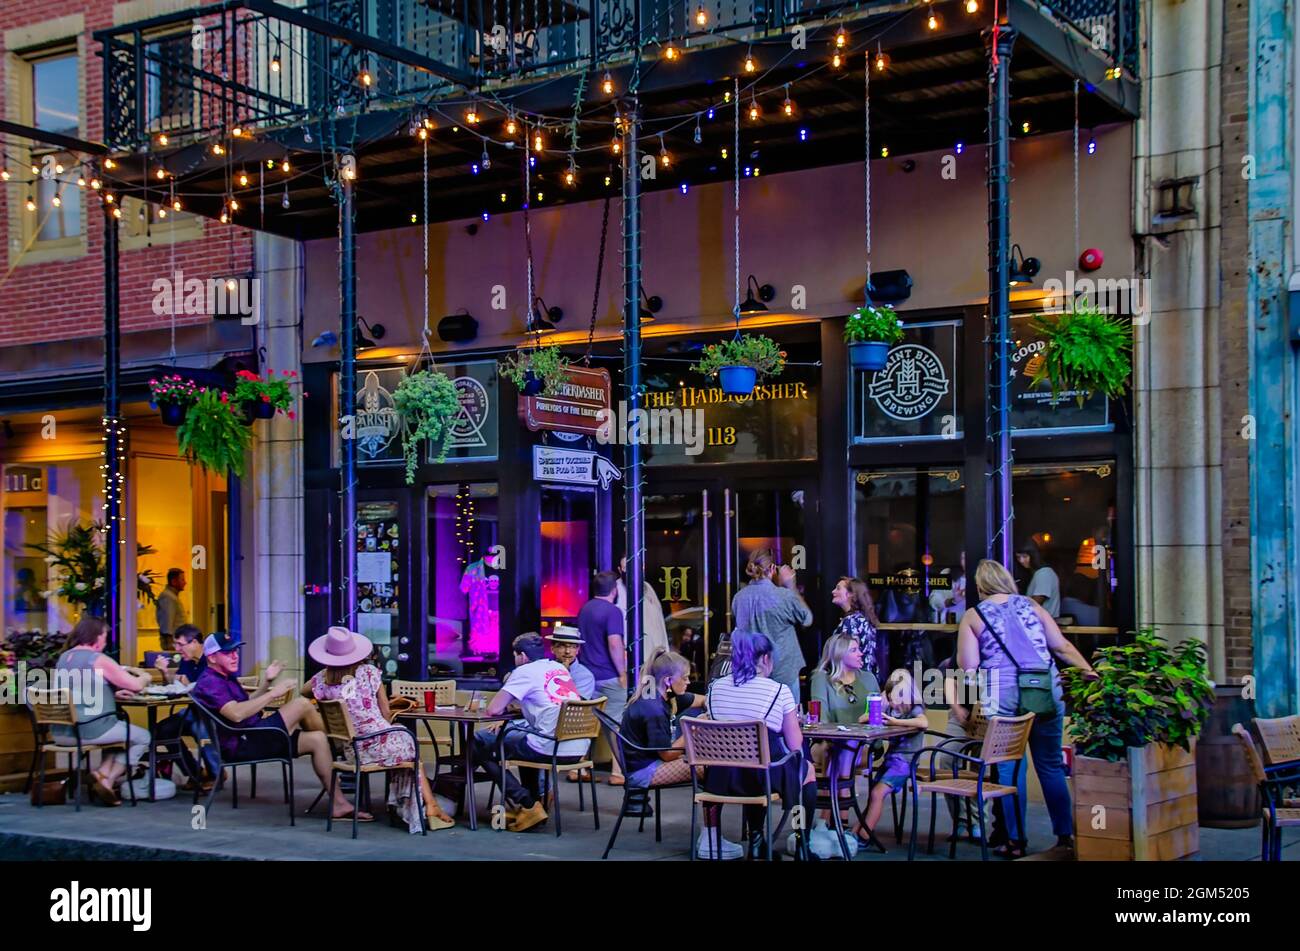 People eat on the sidewalk patio at The Haberdasher on Dauphin Street, Sept. 10, 2021, during Second Friday activities in Mobile, Alabama. Stock Photo